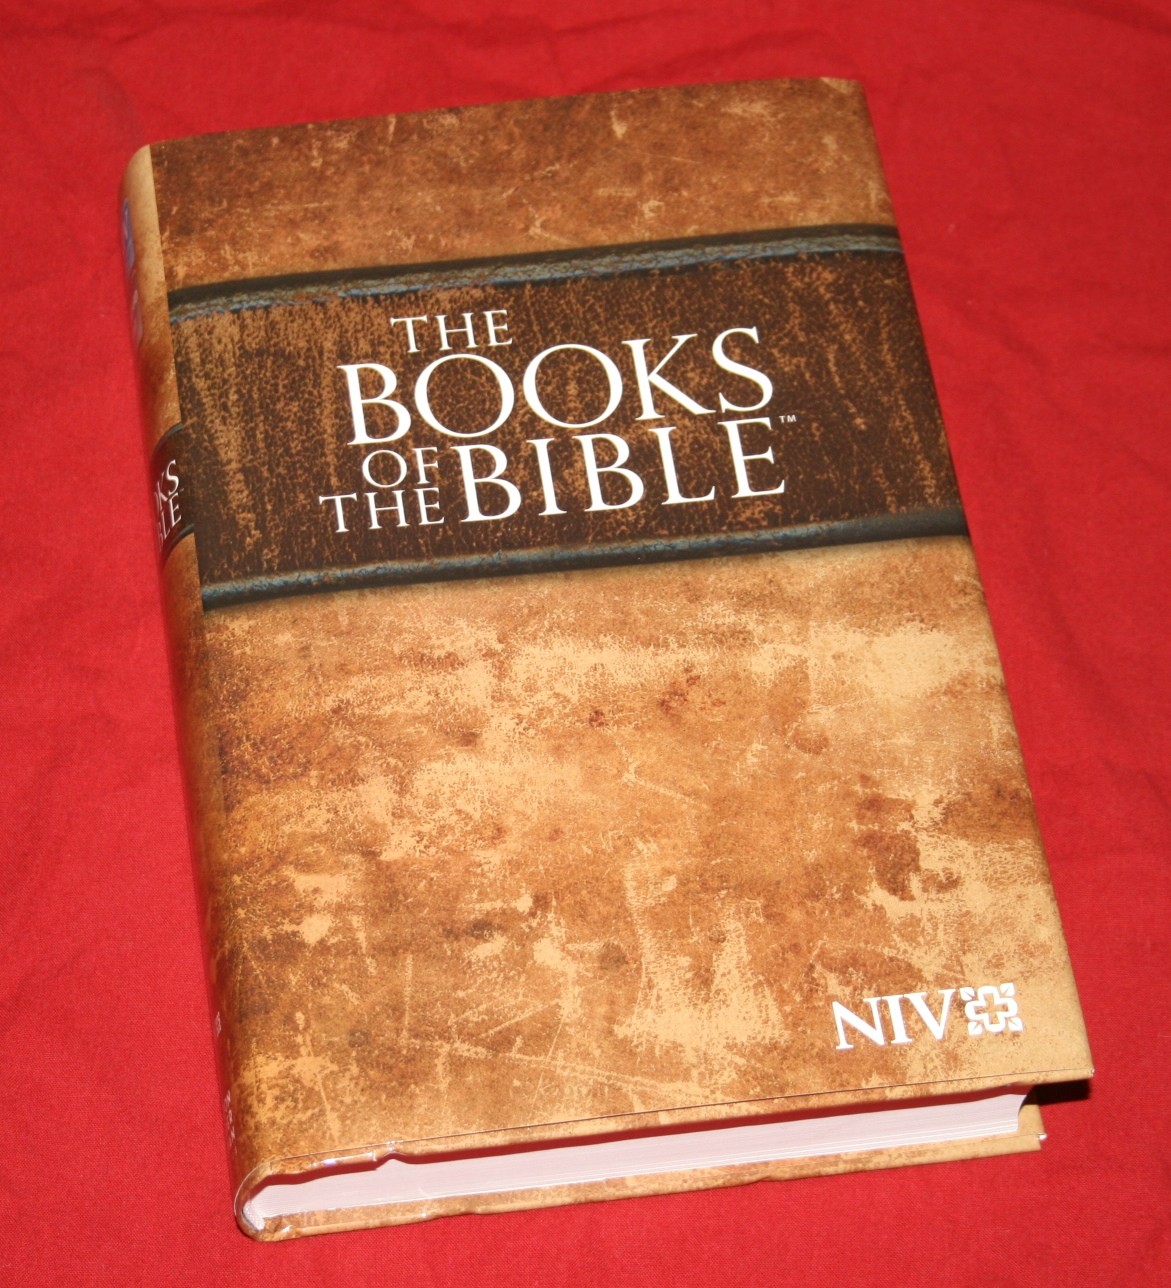 book reviews on the bible